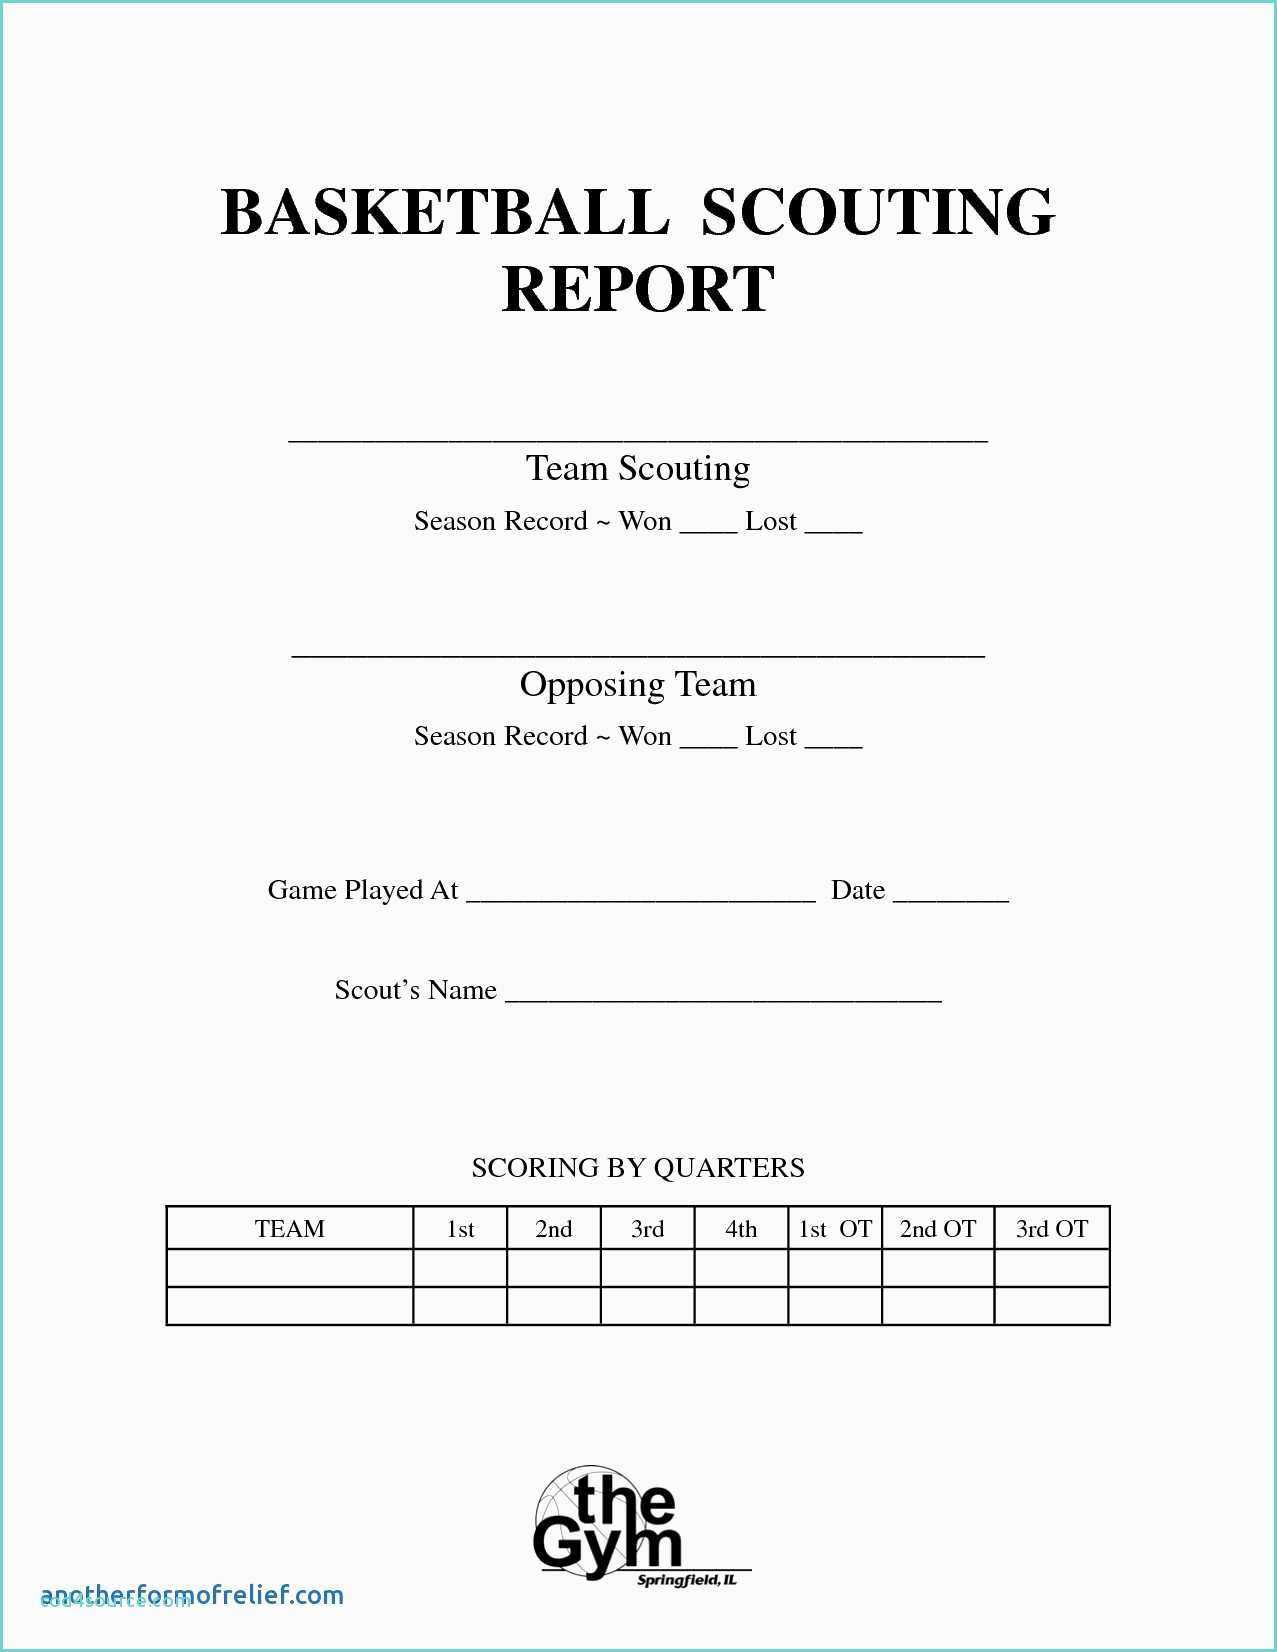 Bowling Spreadsheet And Basketball Scouting Report Template Within Scouting Report Basketball Template